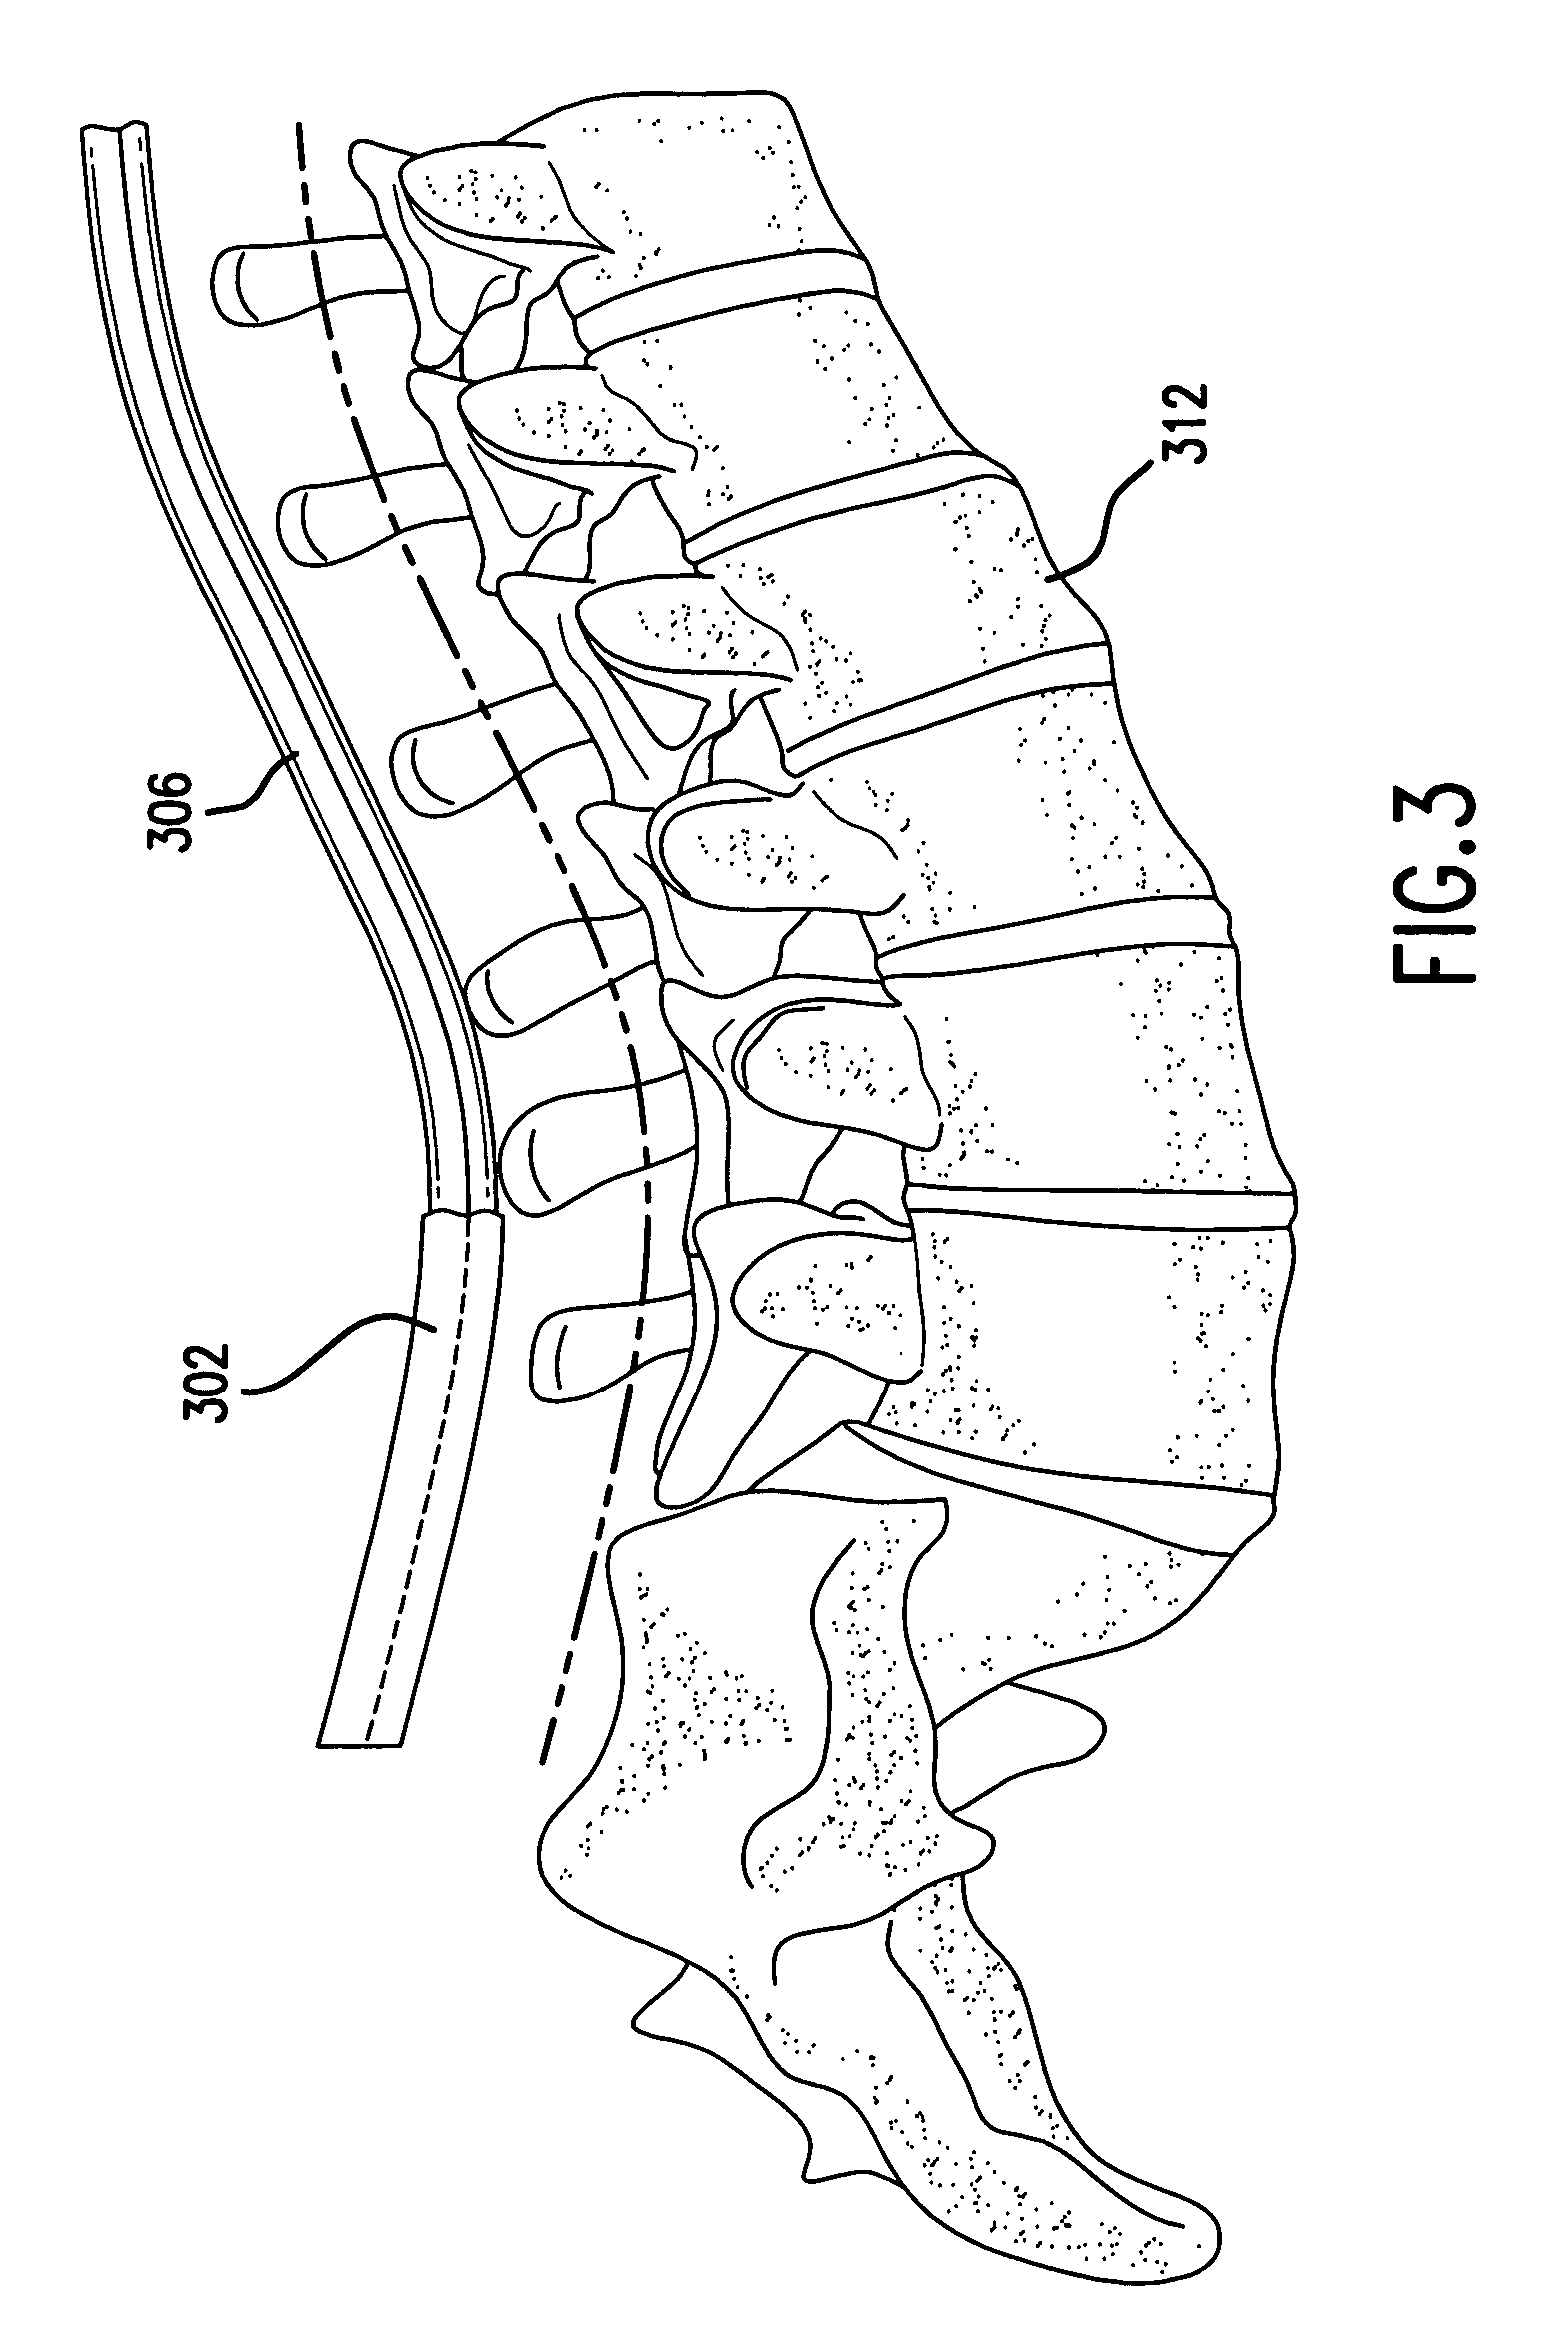 Spinal curvature correction device